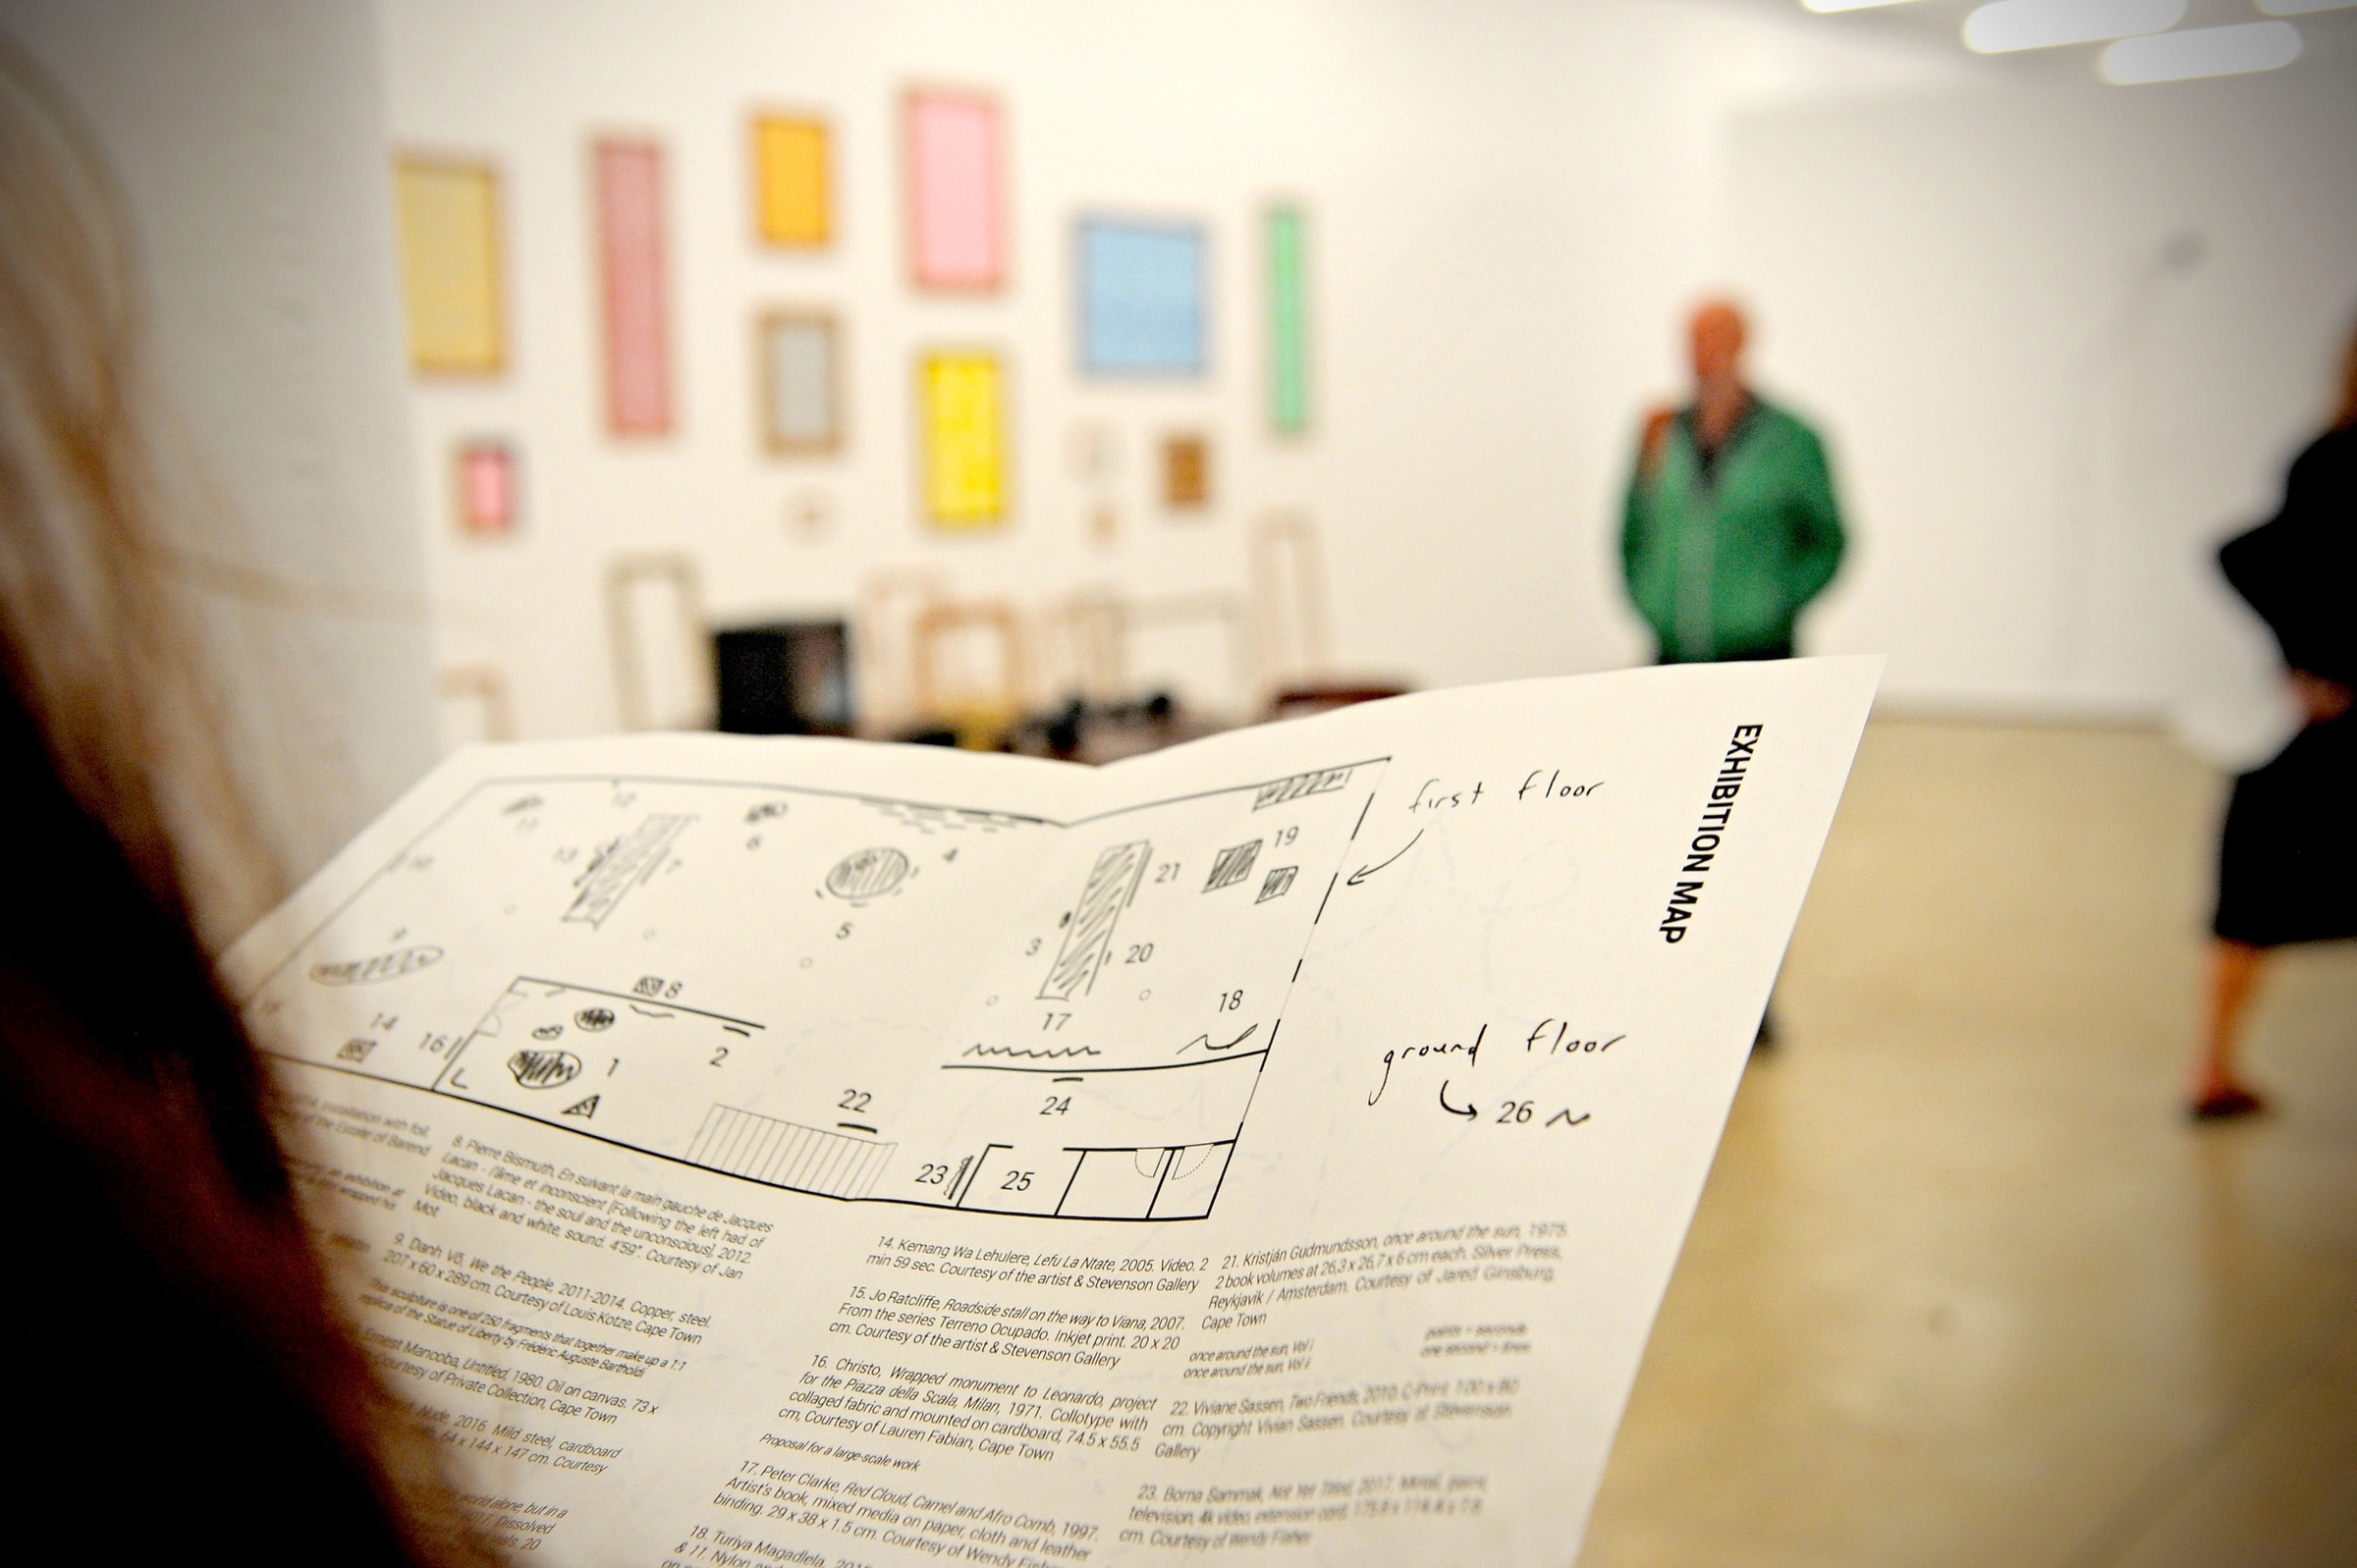 Event photograph from the More For Less exhibition in A4’s Gallery that shows an attendee holding an exhibition handout.
